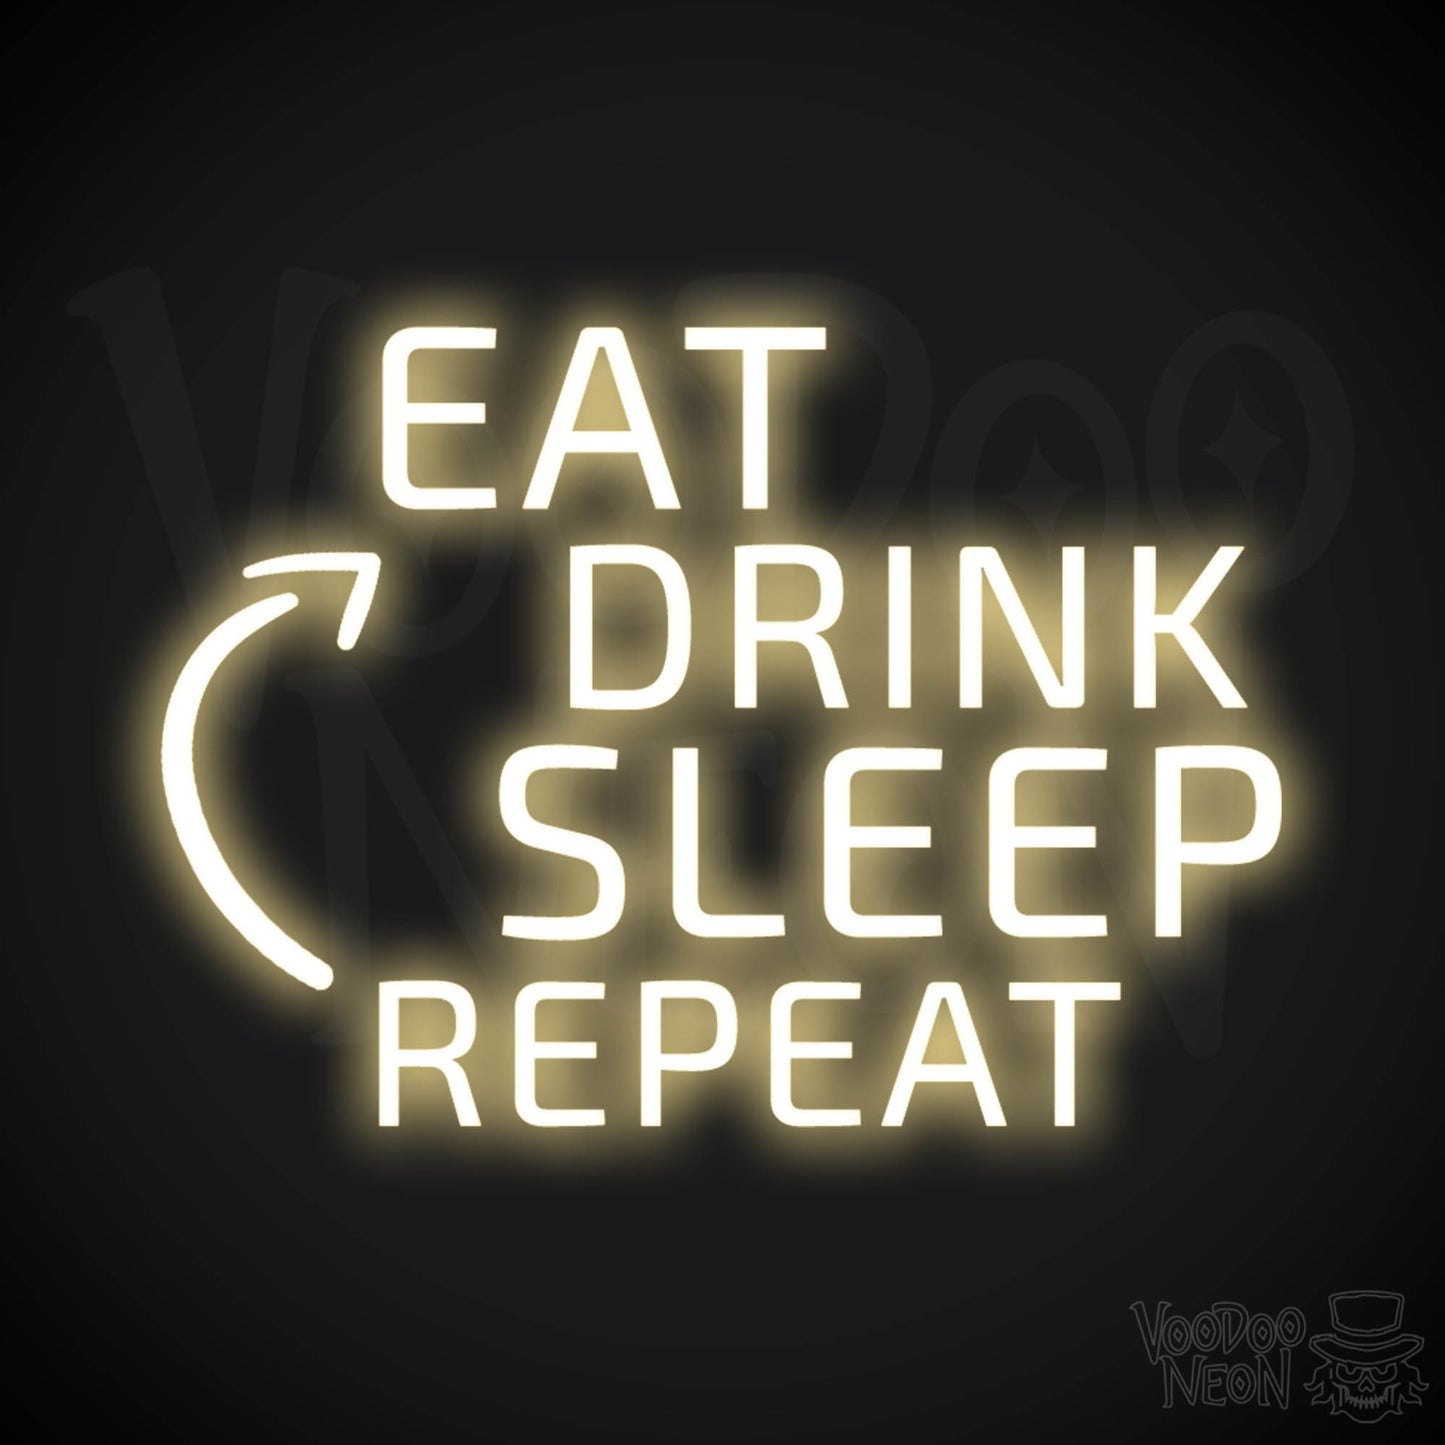 Eat Drink Sleep Repeat Neon Sign - Eat Drink Sleep Repeat Sign - Color Warm White